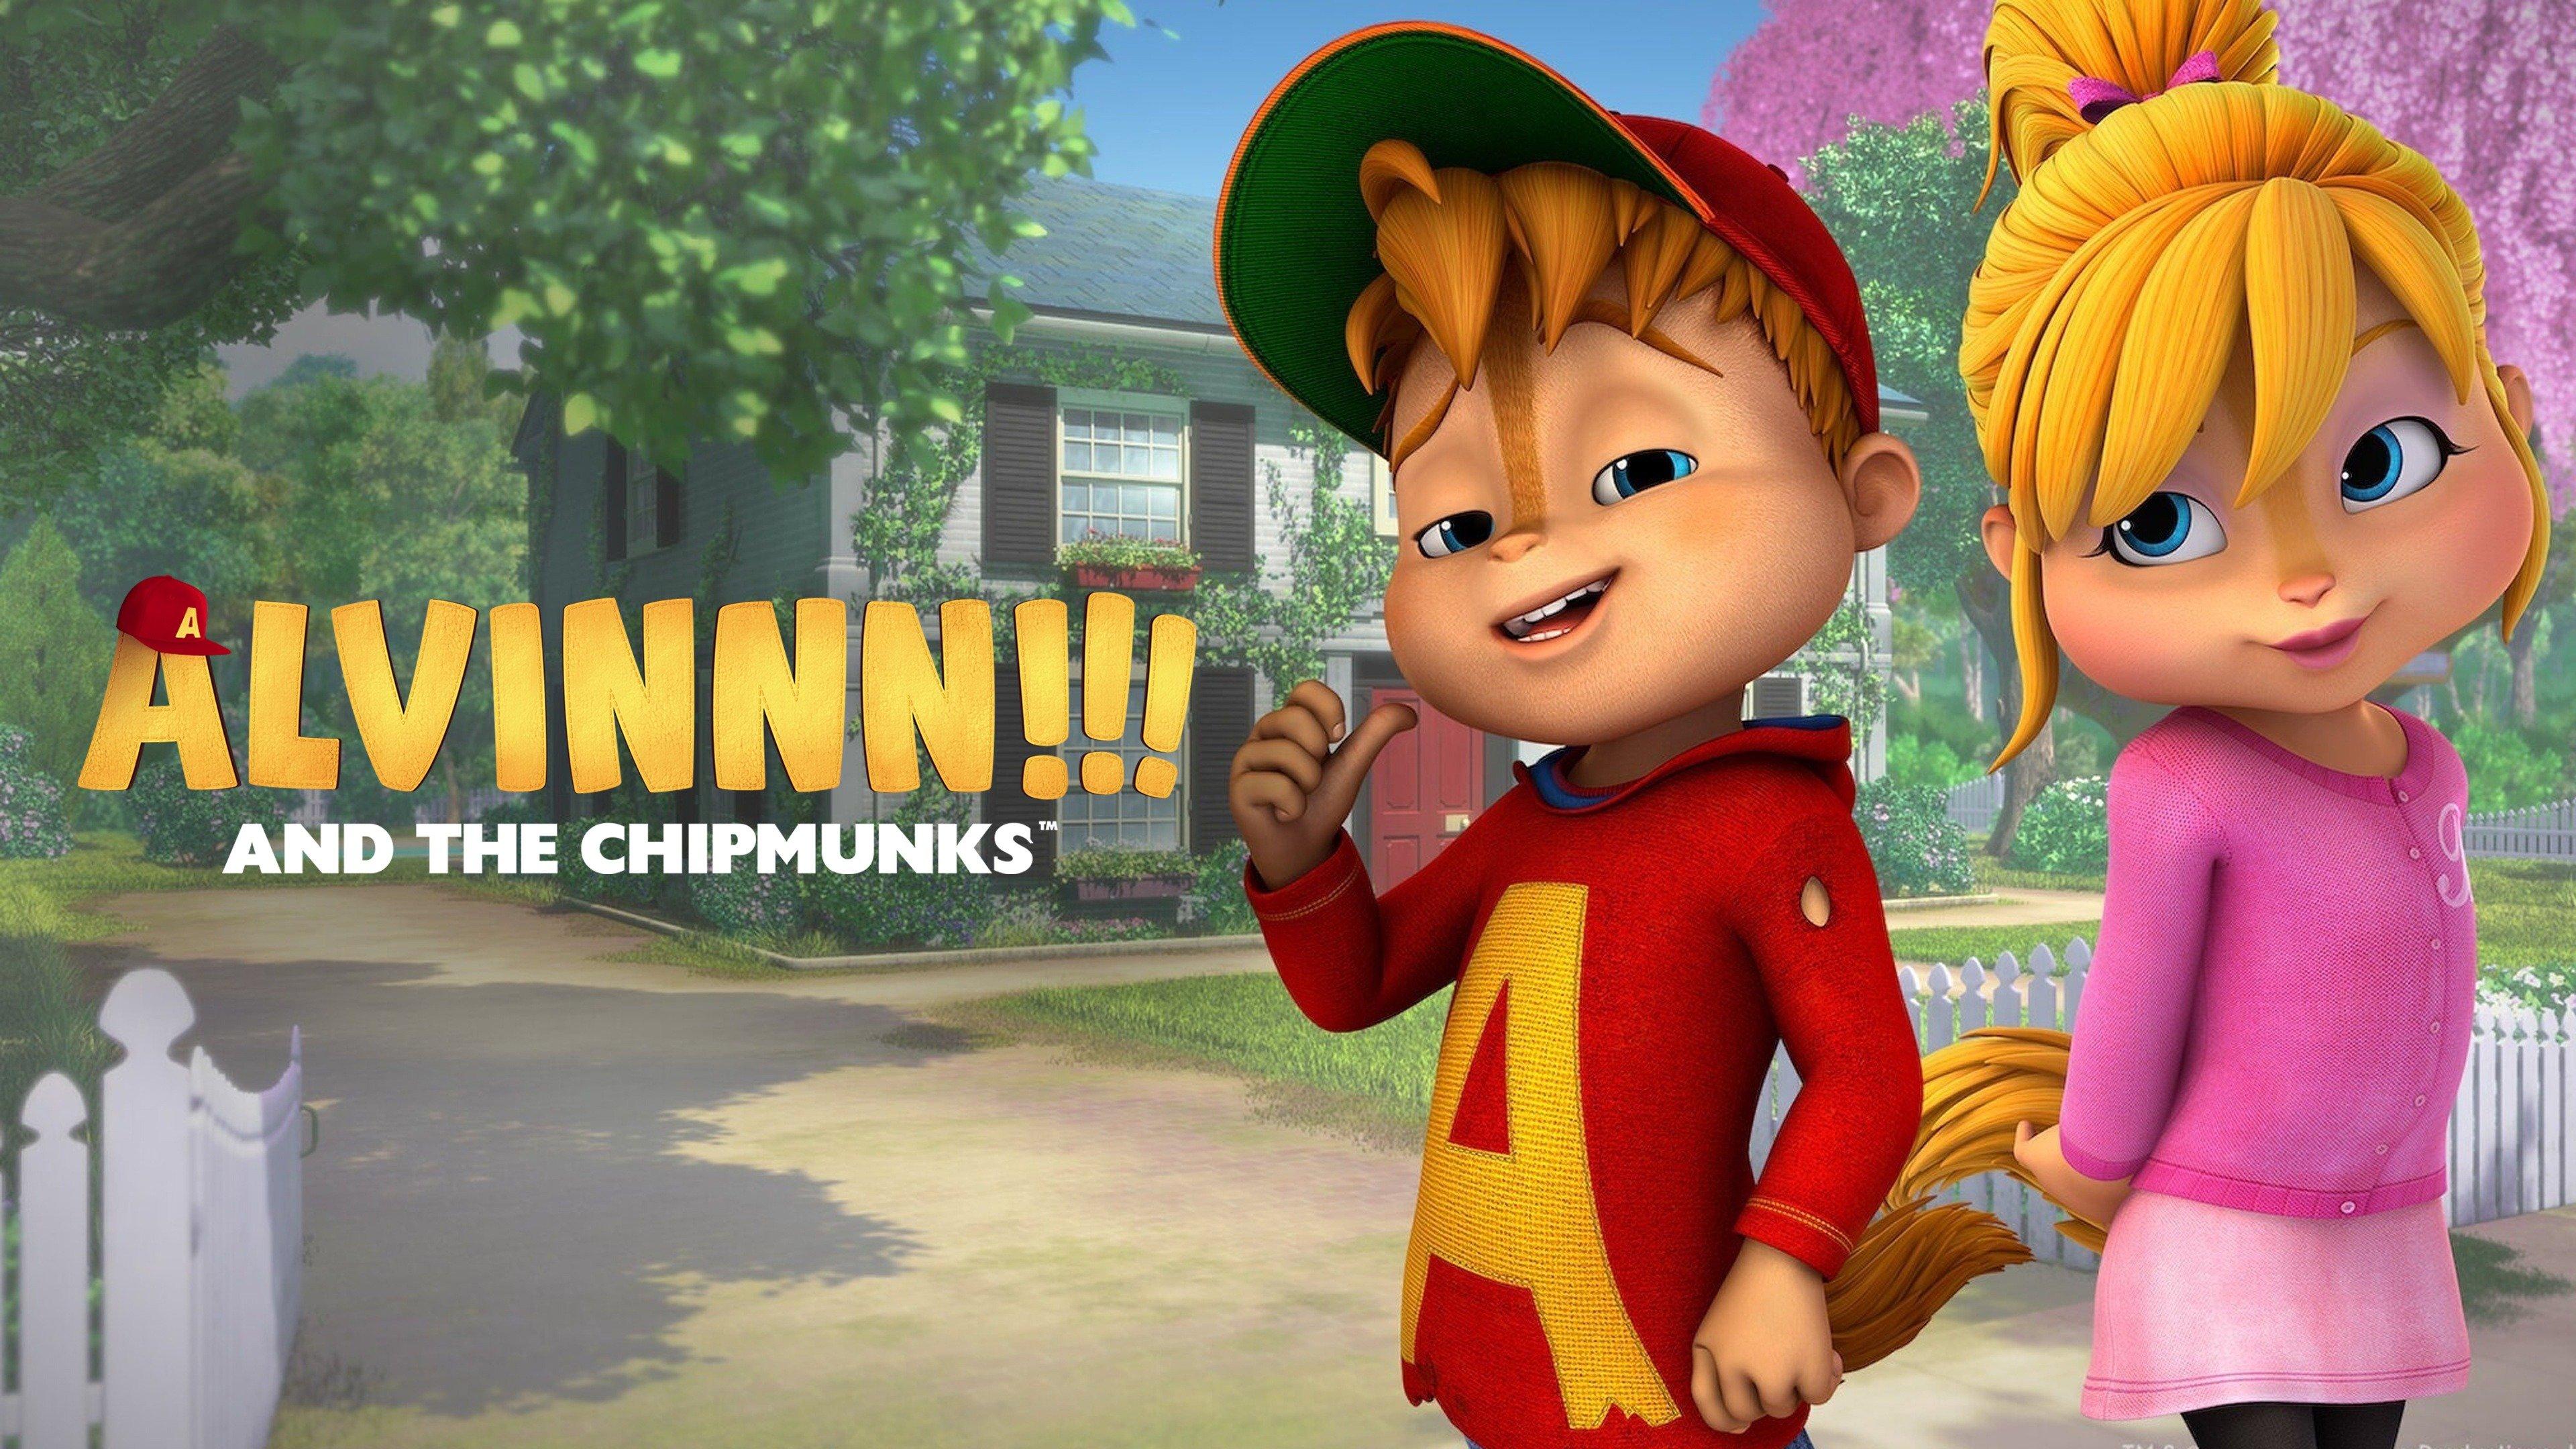 Watch Alvinnn!!! and the Chipmunks Streaming Online on Philo (Free Trial)